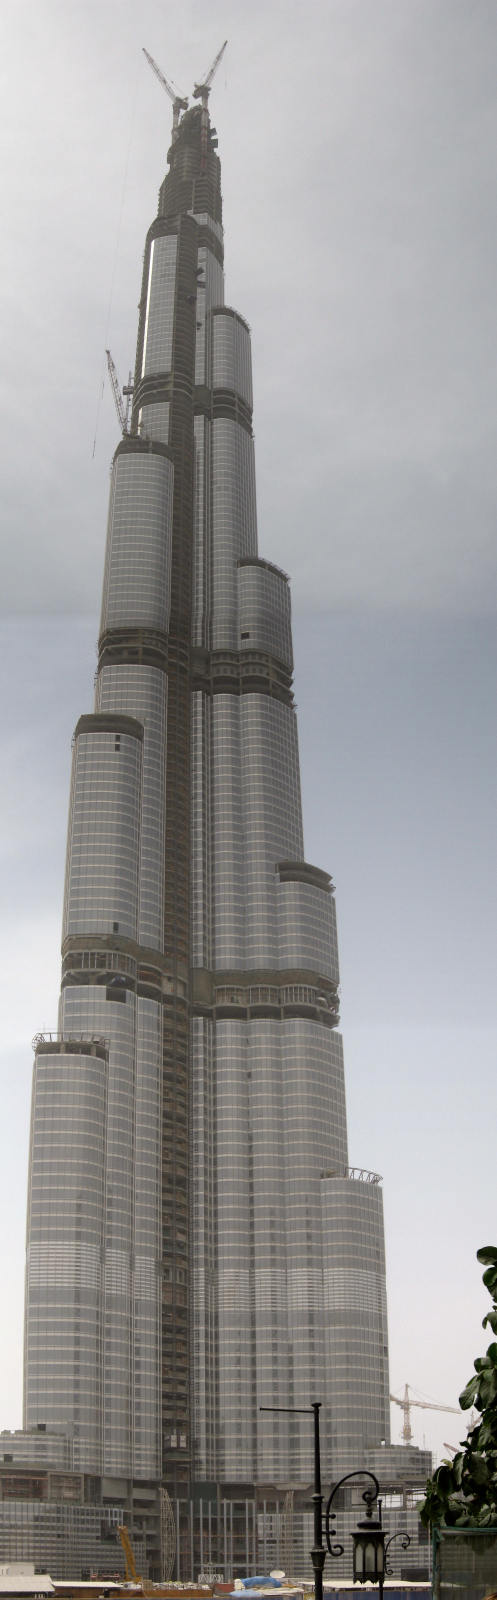 Burj Dubai has become the highest ever erected structure